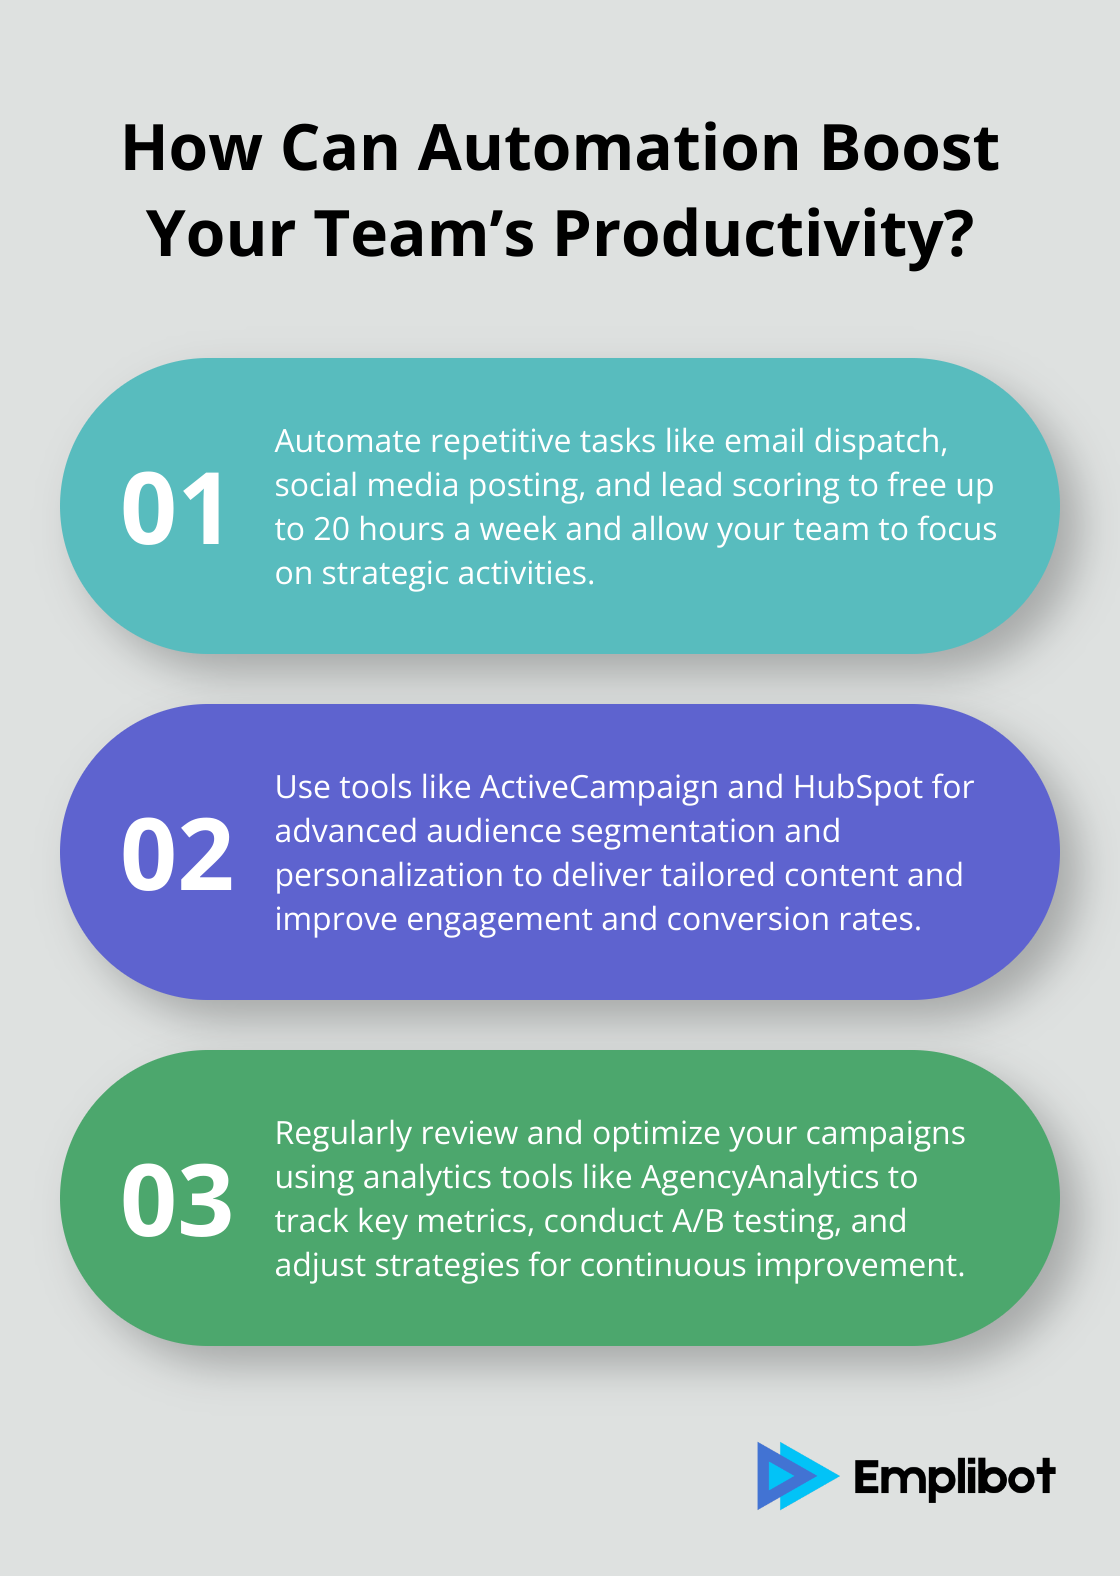 Fact - How Can Automation Boost Your Team’s Productivity?